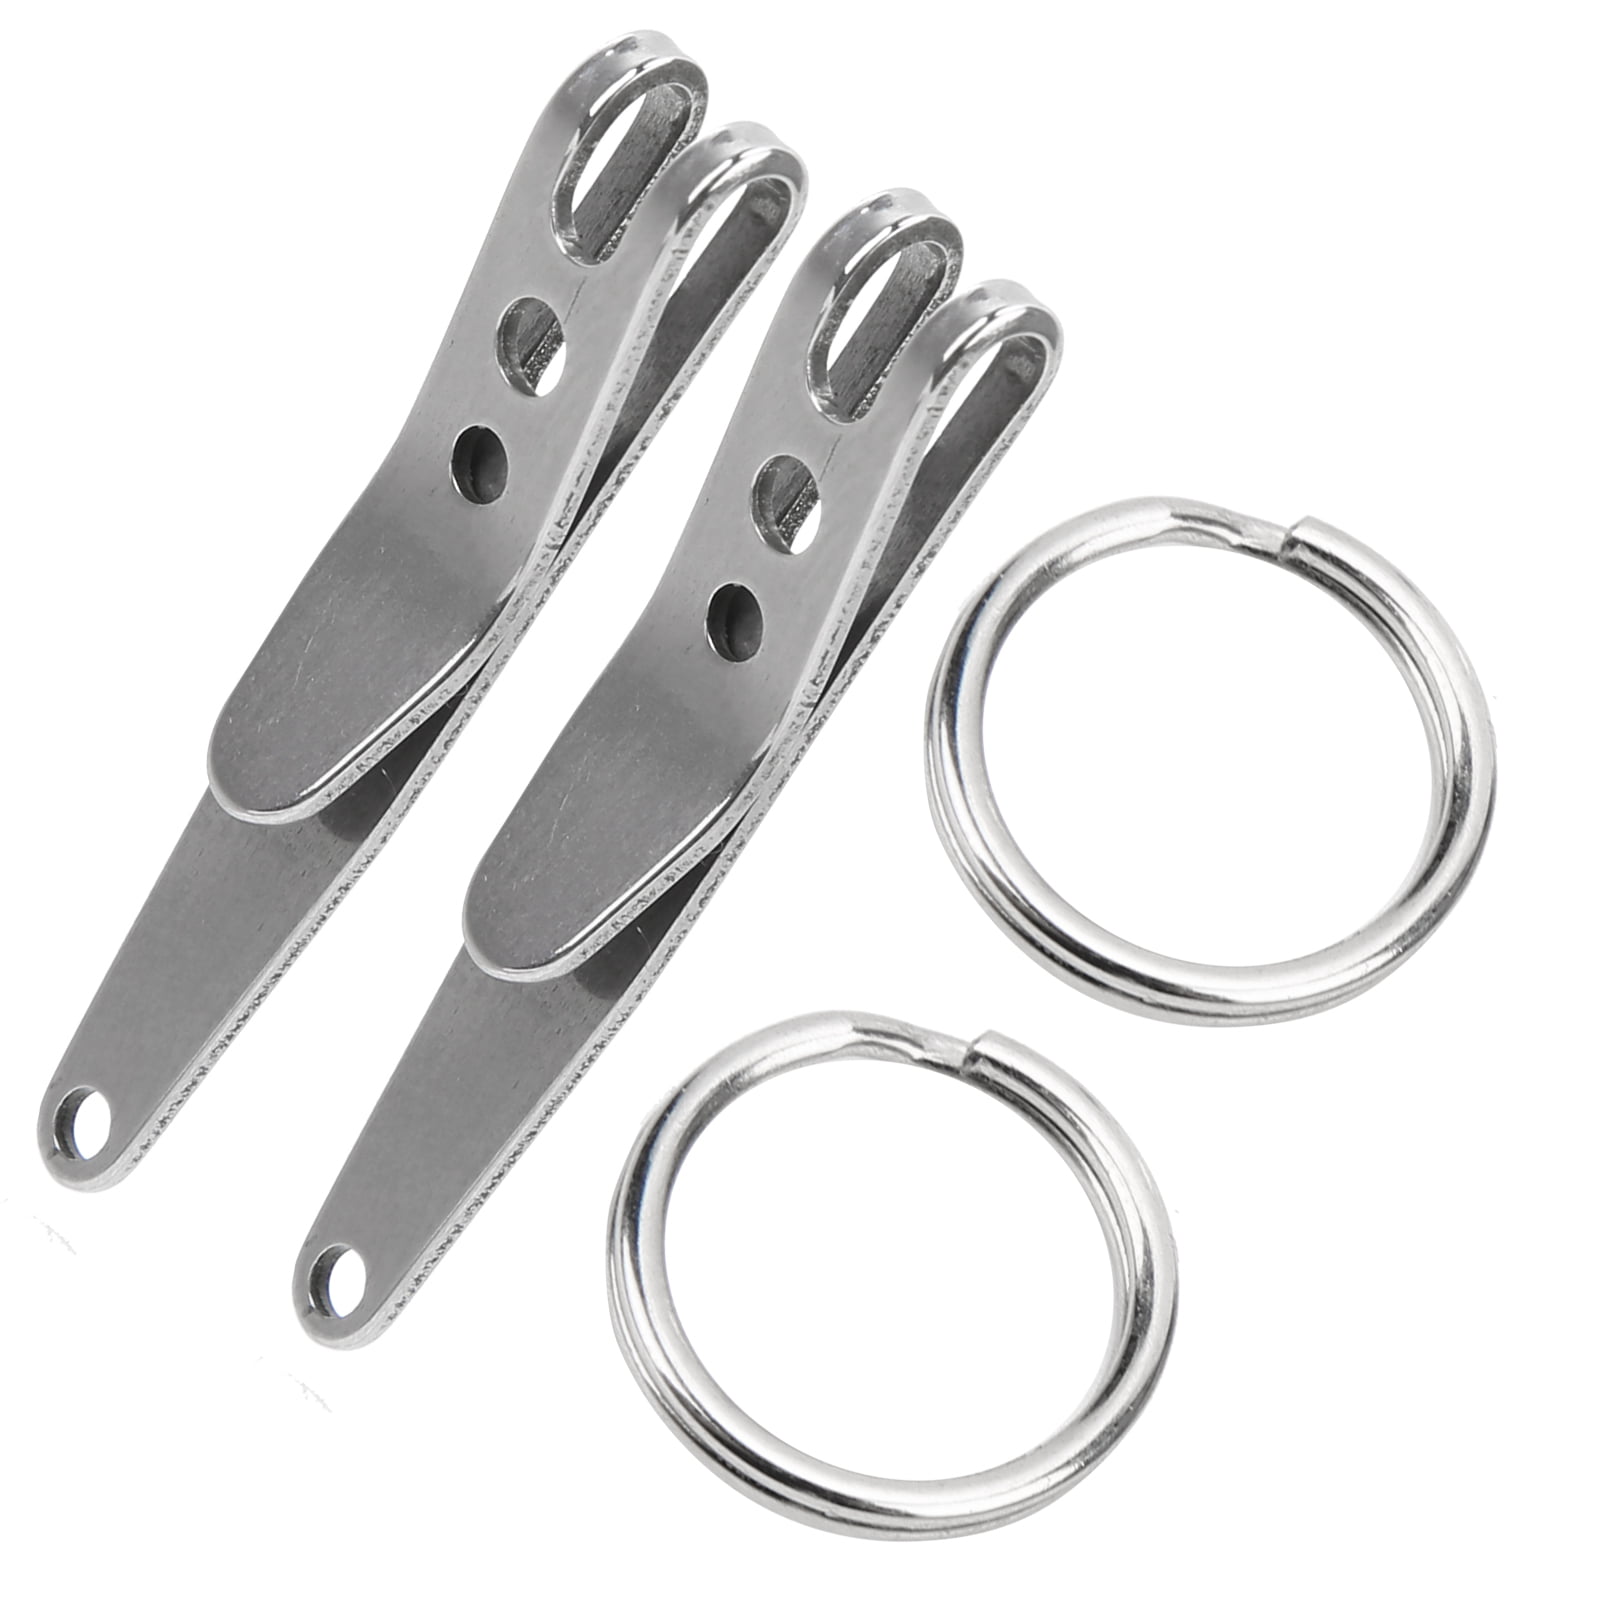 2x Gear Pocket Suspension Clip Stainless Steel with Key Ring Keychain  vvsa 